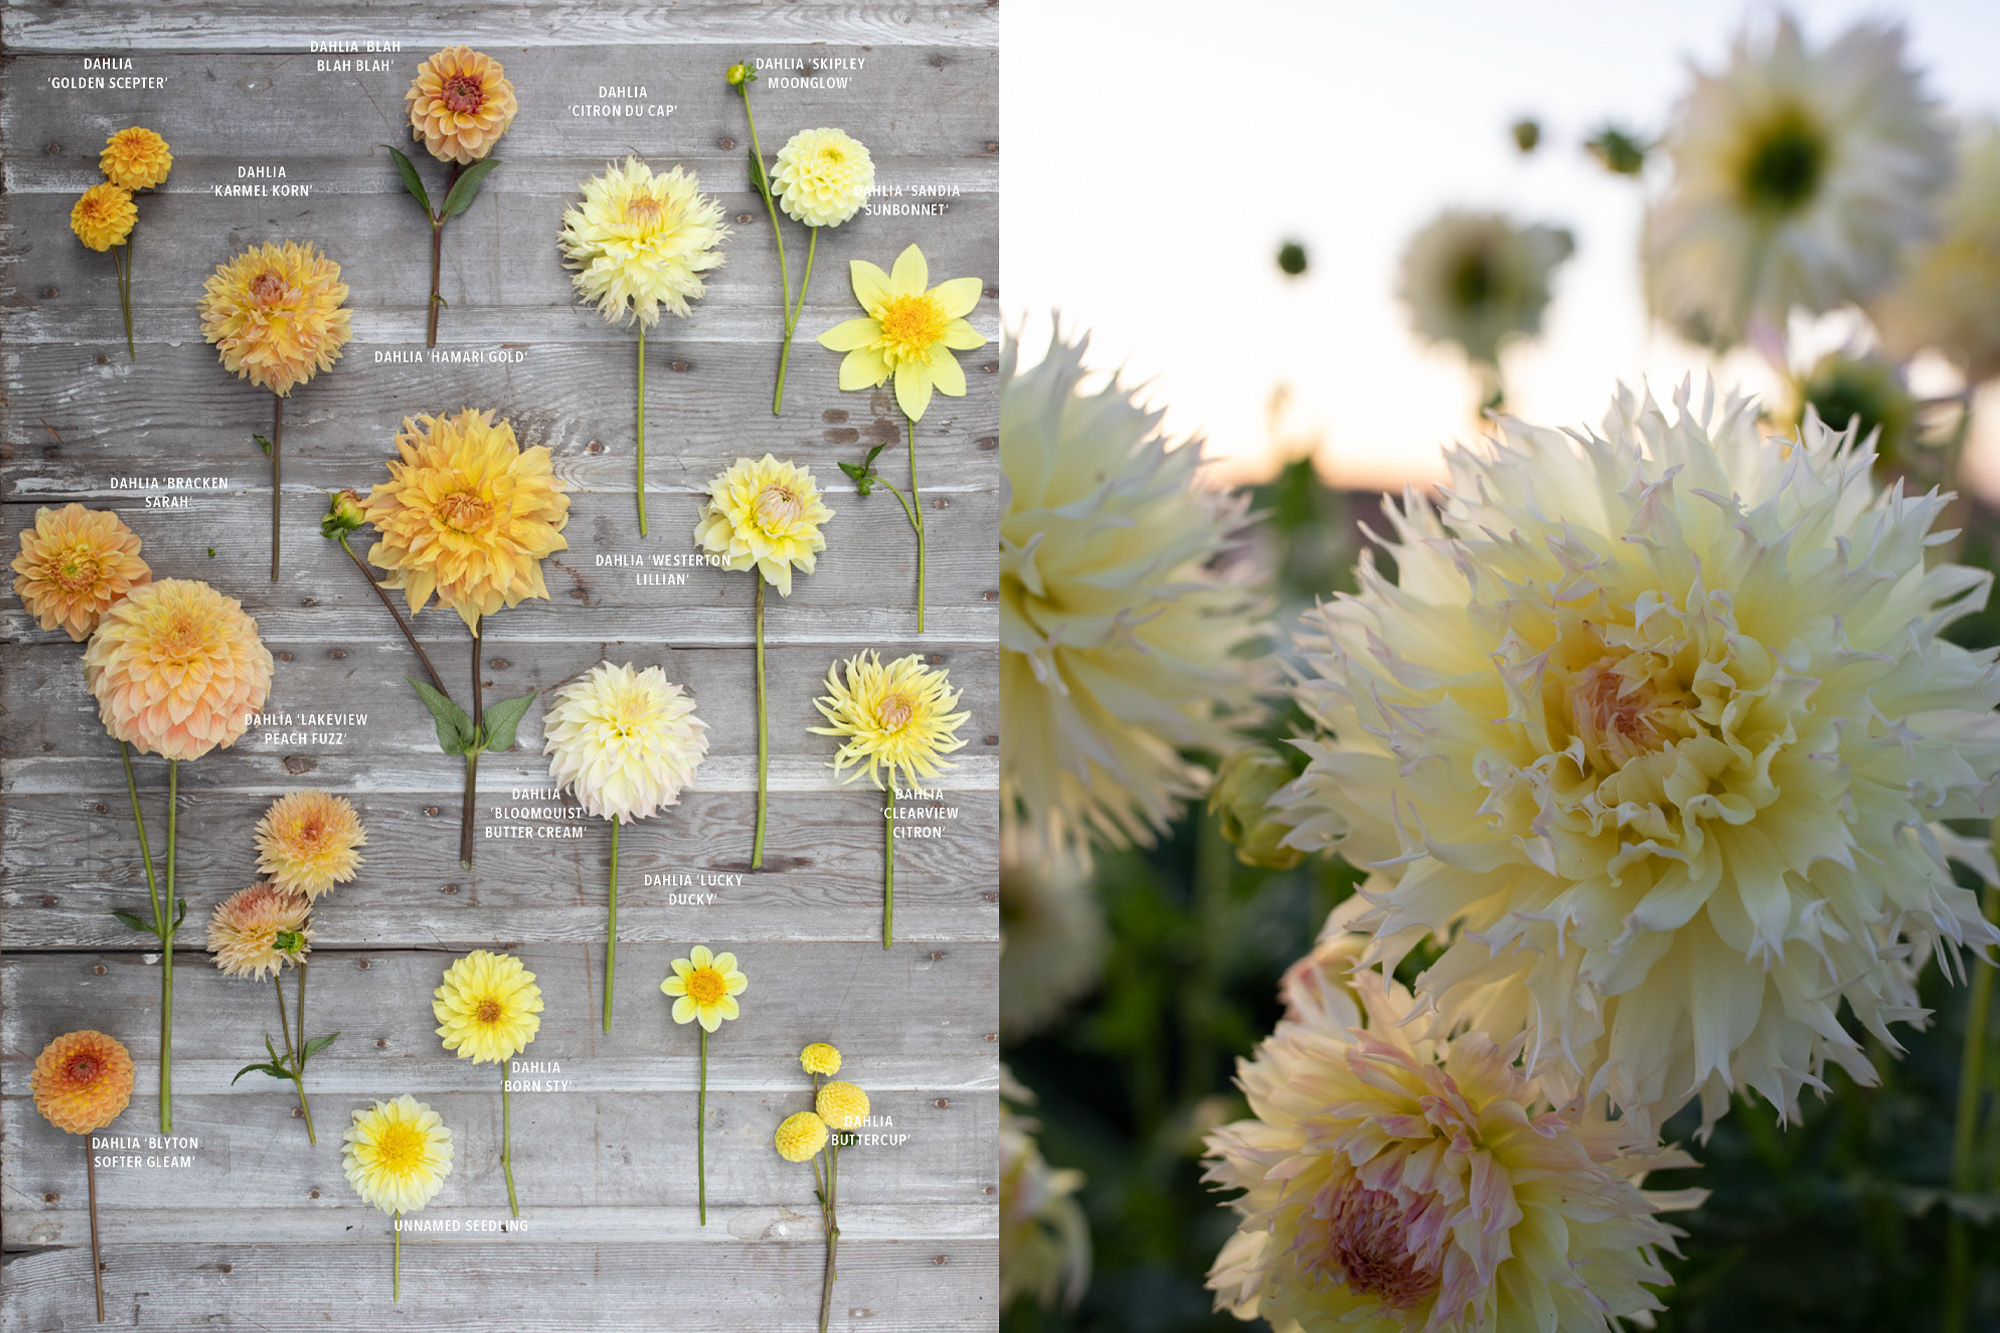 A page from Floret Farm's Discovering Dahlias showing various dahlia varieties